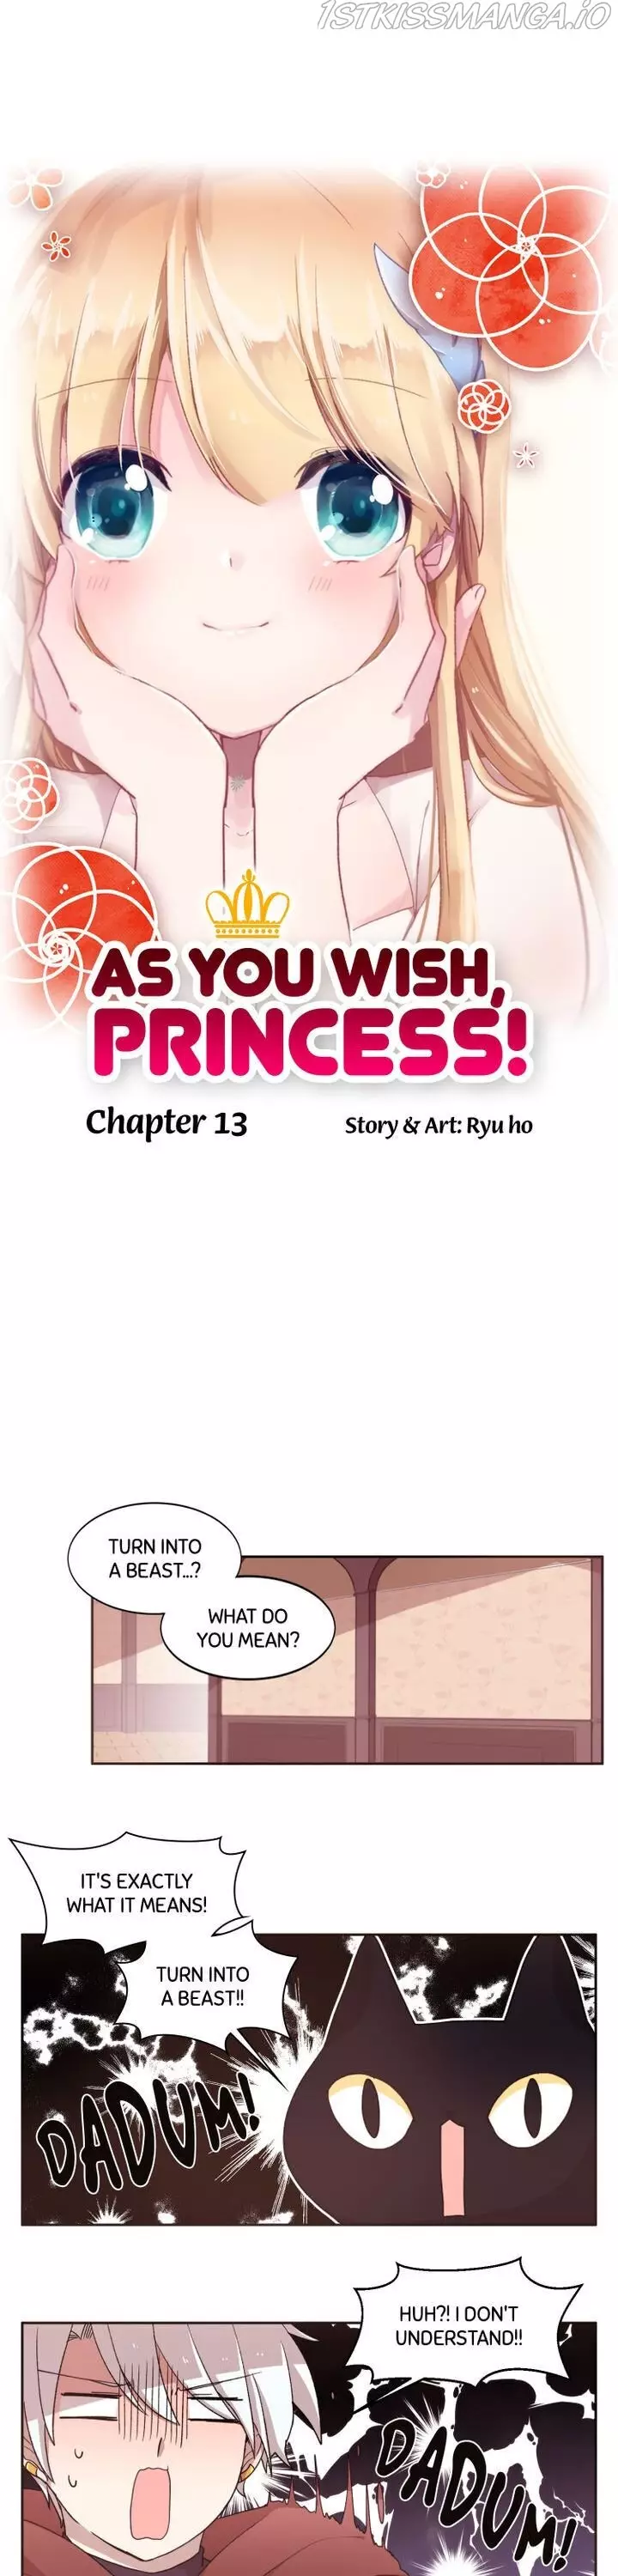 Whatever The Princess Desires! - 13 page 1-2db0a68b